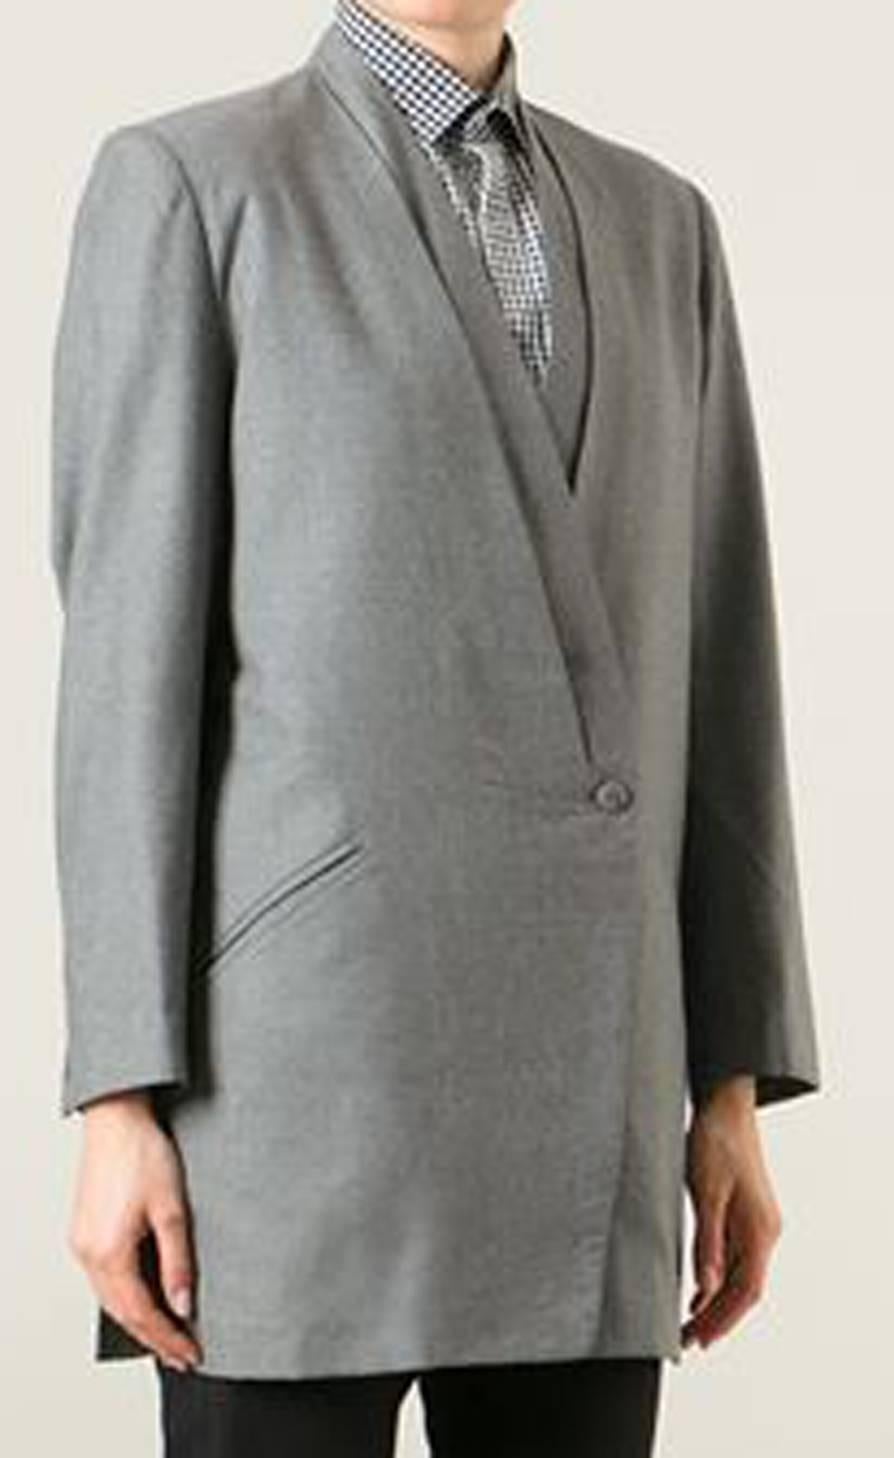 1990s Issey MiyakeGrey wool draped blazer featuring a deep V neck, long sleeves, a front button fastening, two front pockets and side slits. 
In excellent vintage condition. Made in Japan.
Label size: S
We guarantee you will receive this gorgeous